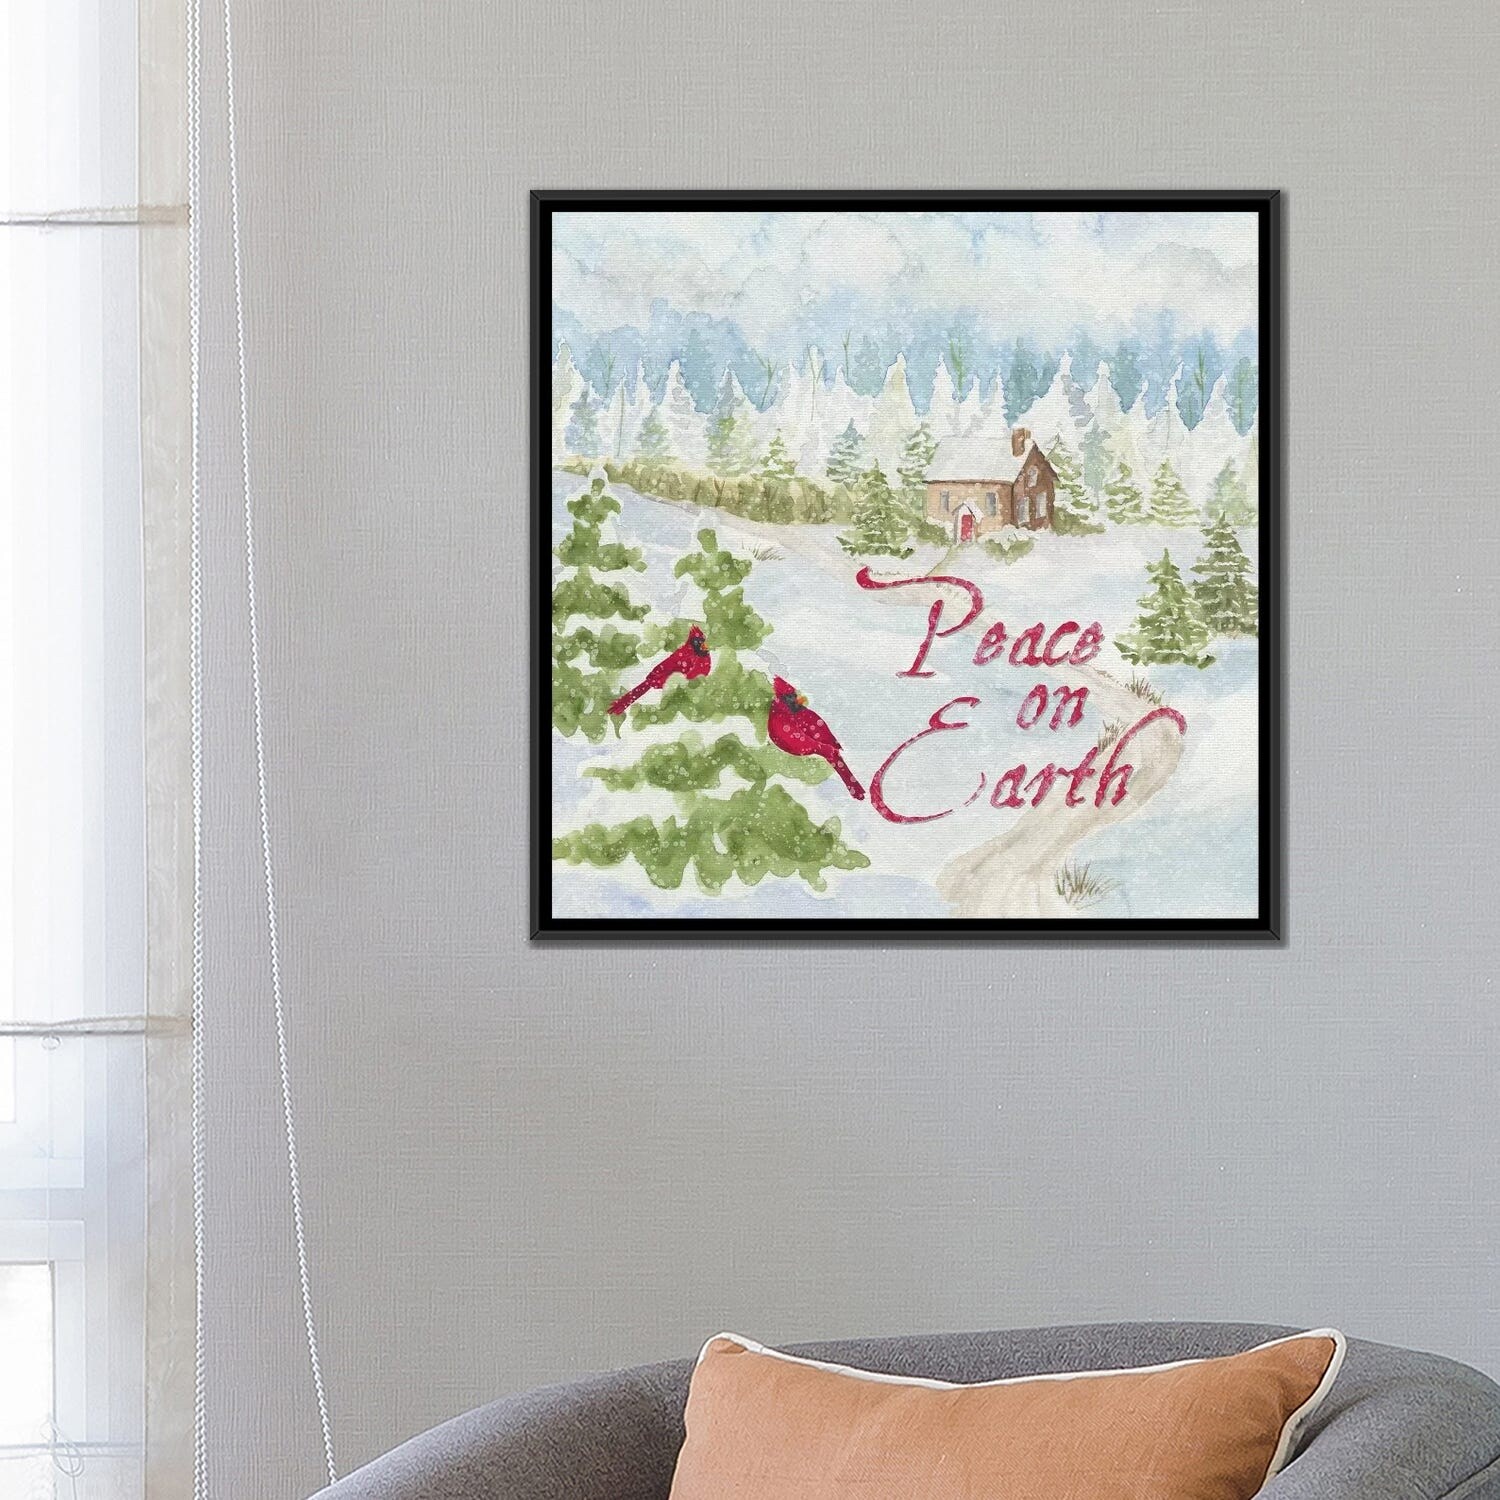 Christmas in the Country Pillow